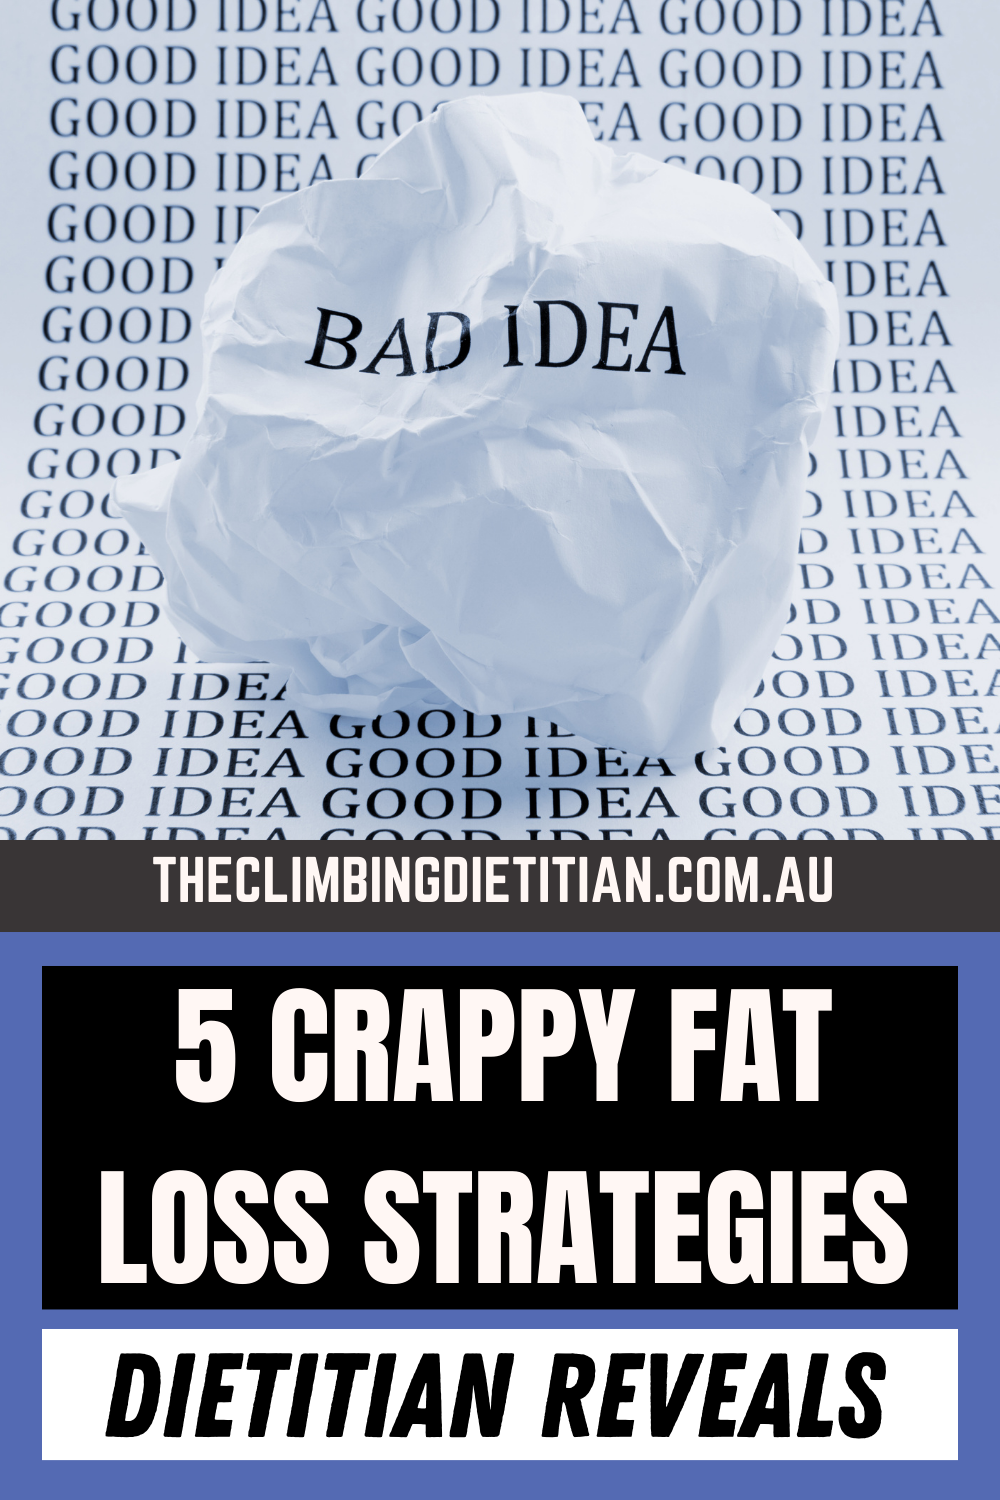 5 Crappy Fat Loss Strategies (That You Should Avoid Doing)-Sports Dietitian-Brisbane Dietitian-Nutritionist-Online nutrition coach